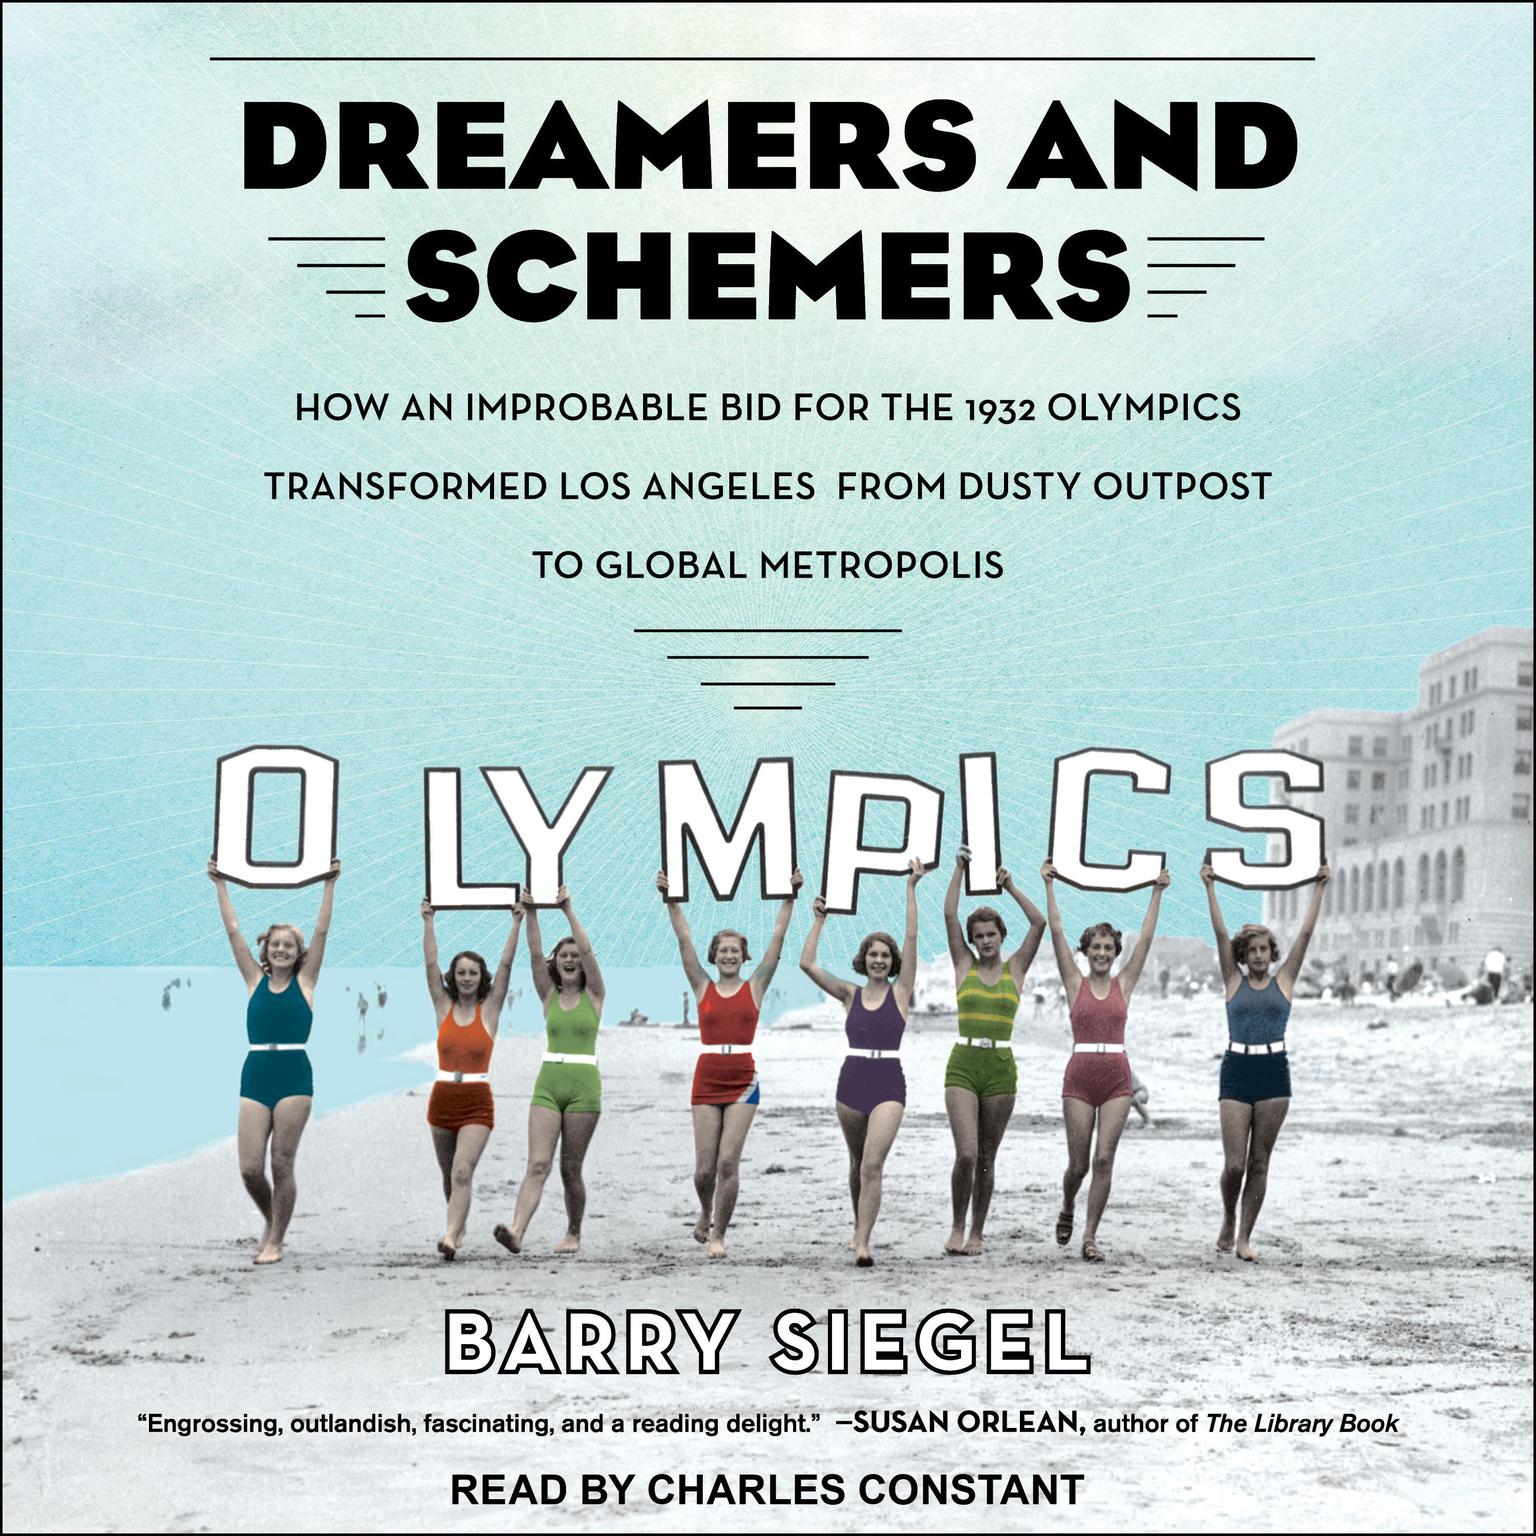 Dreamers and Schemers: How an Improbable Bid for the 1932 Olympics Transformed Los Angeles from Dusty Outpost to Global Metropolis Audiobook, by Barry Siegel